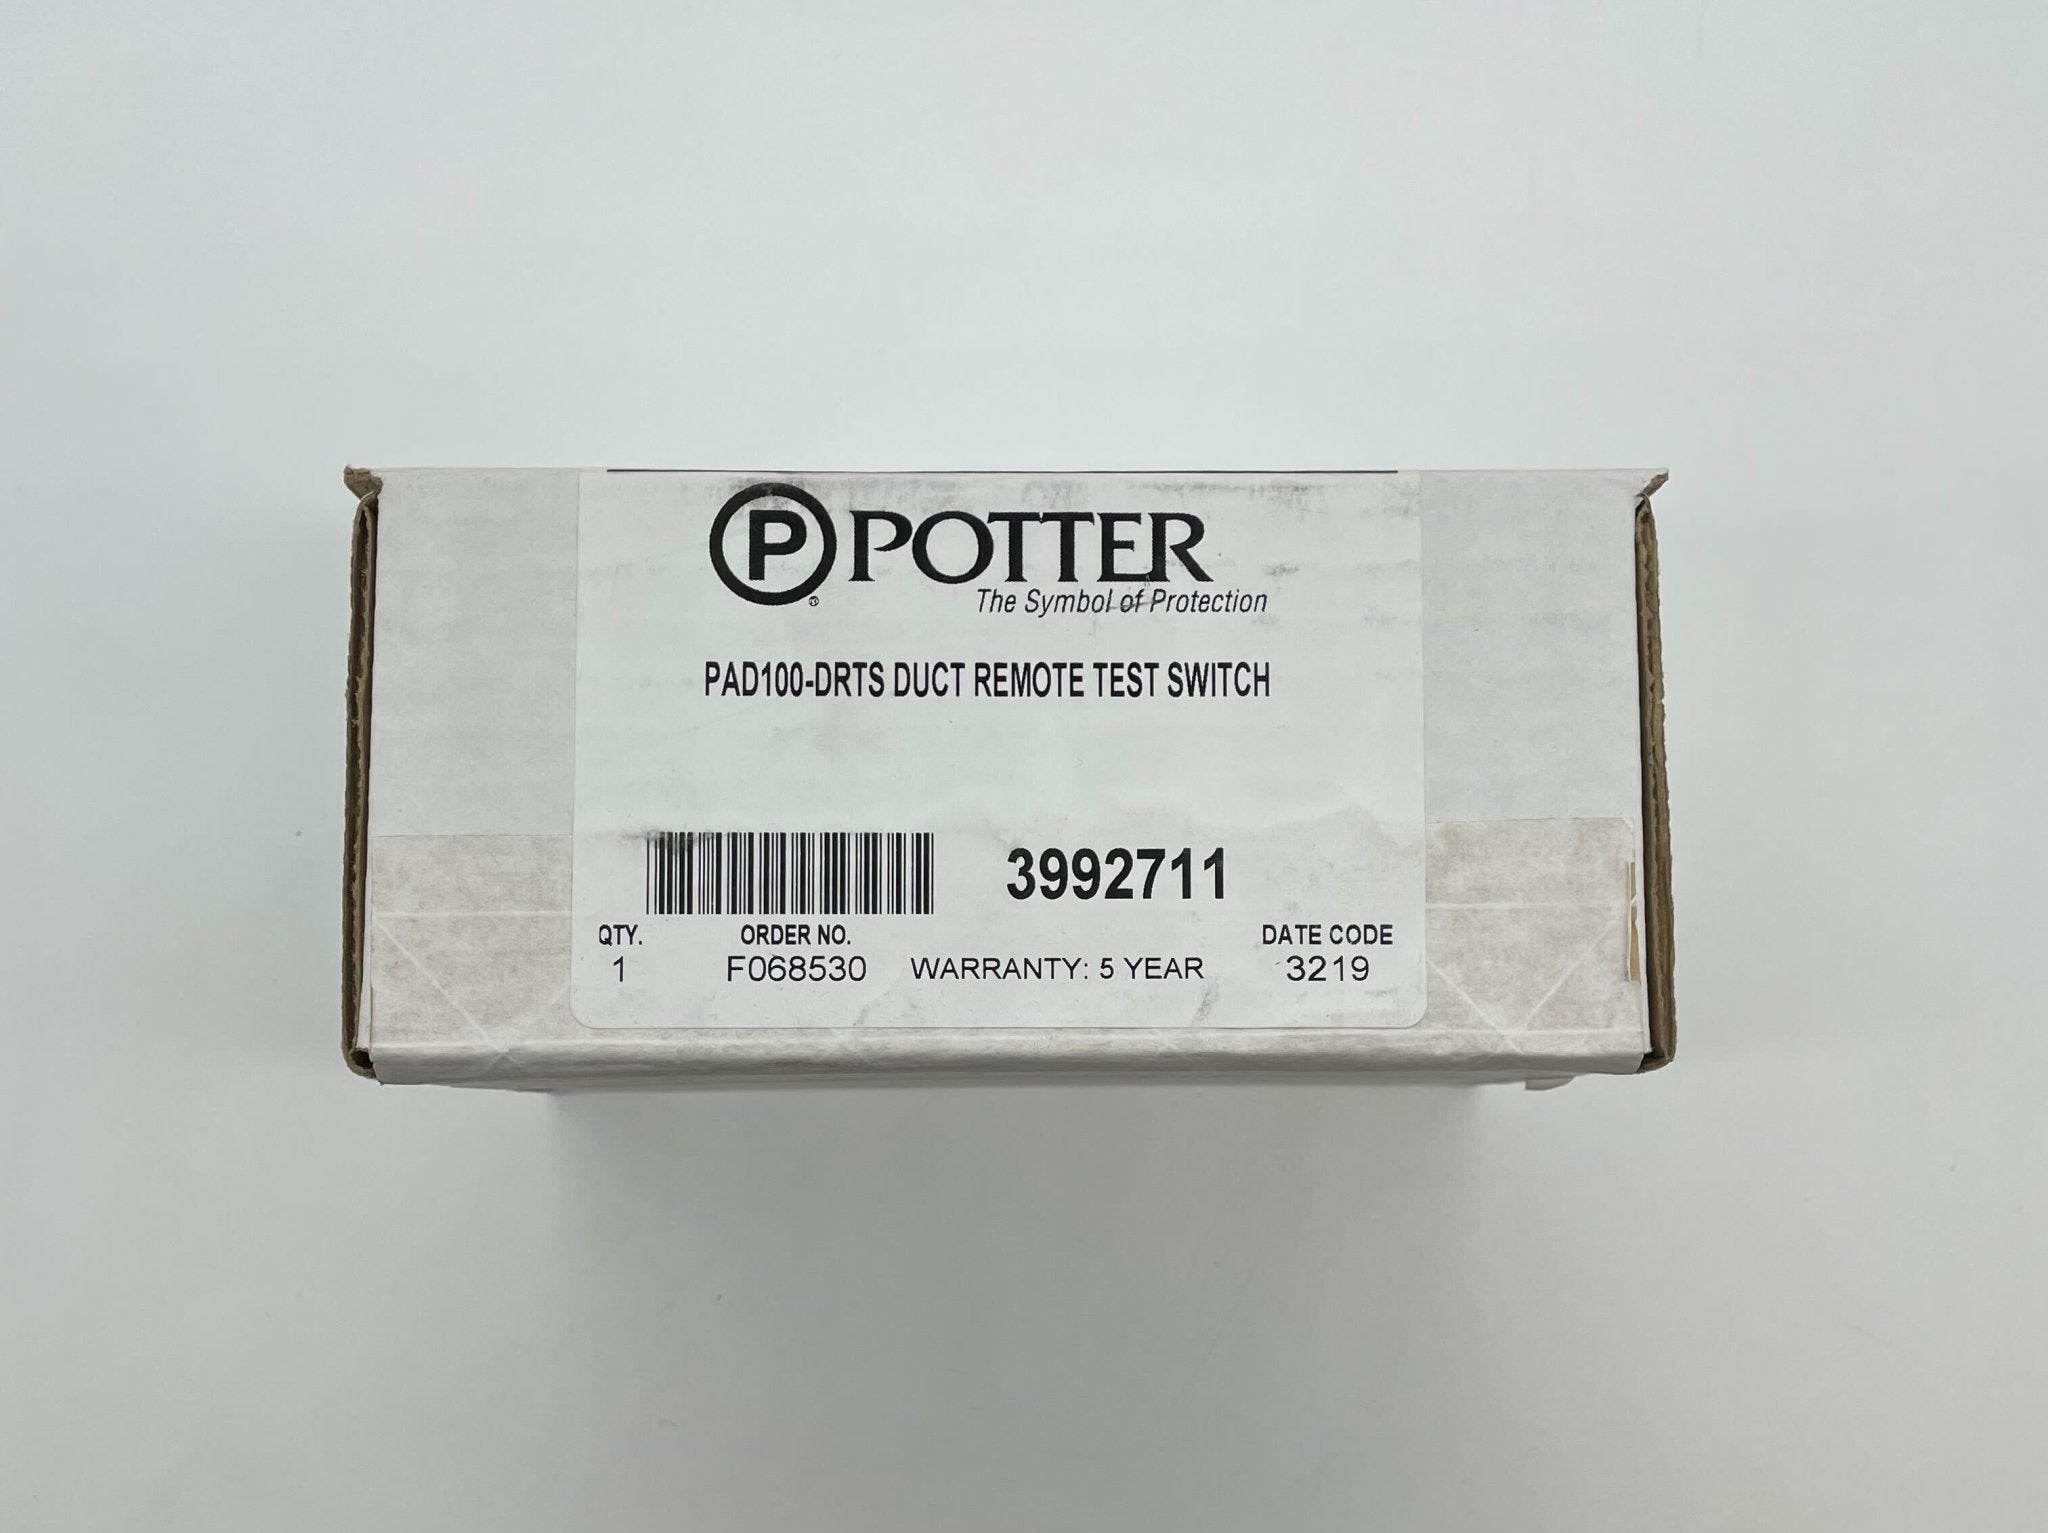 Potter PAD100-DRTS - The Fire Alarm Supplier